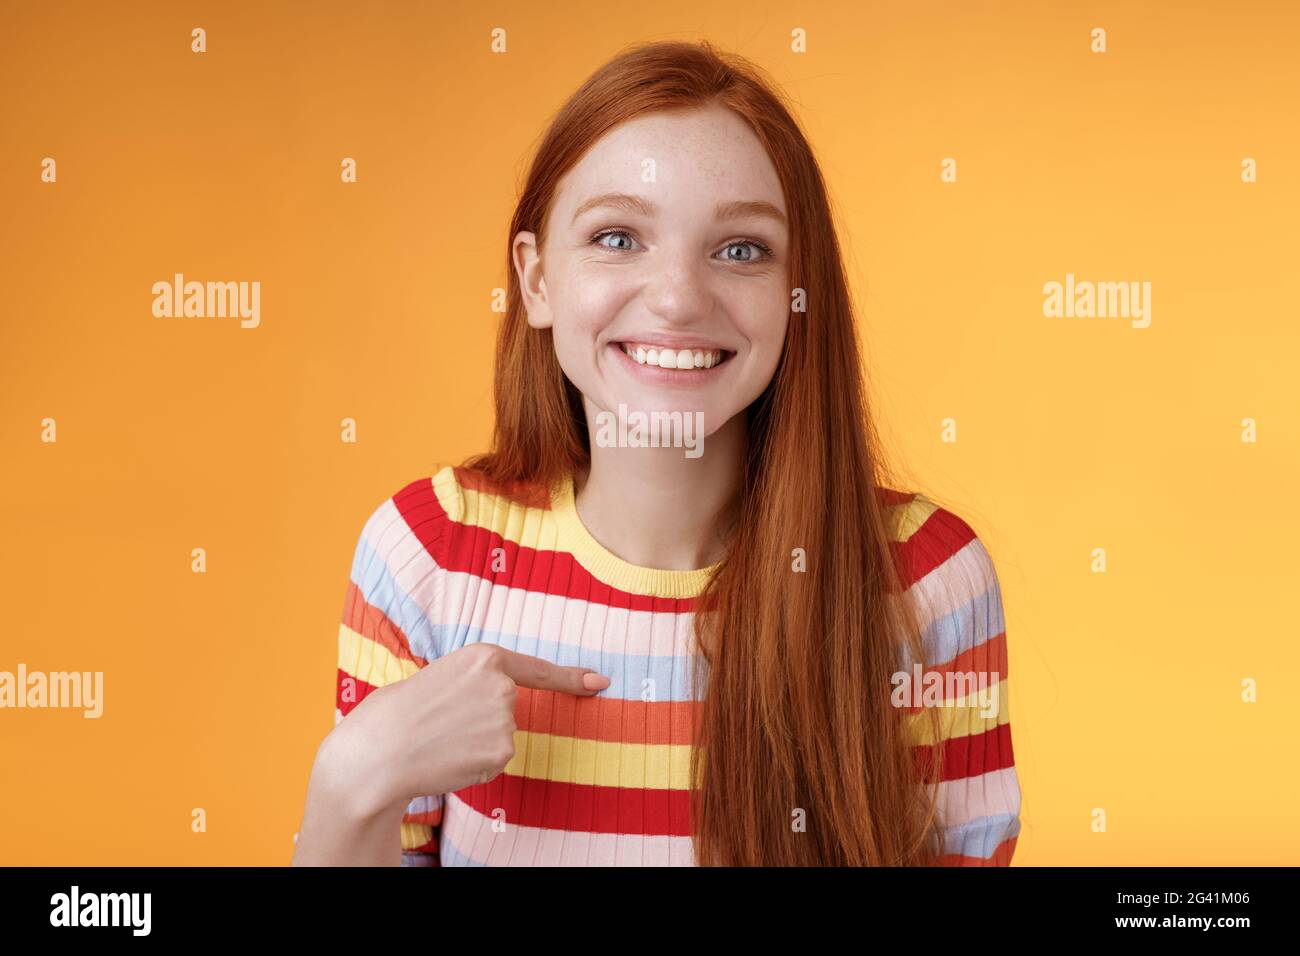 Happy excited grinning redhead girl chosen smiling gratitude delighted gladly pointing herself look surprise thankful camera got Stock Photo